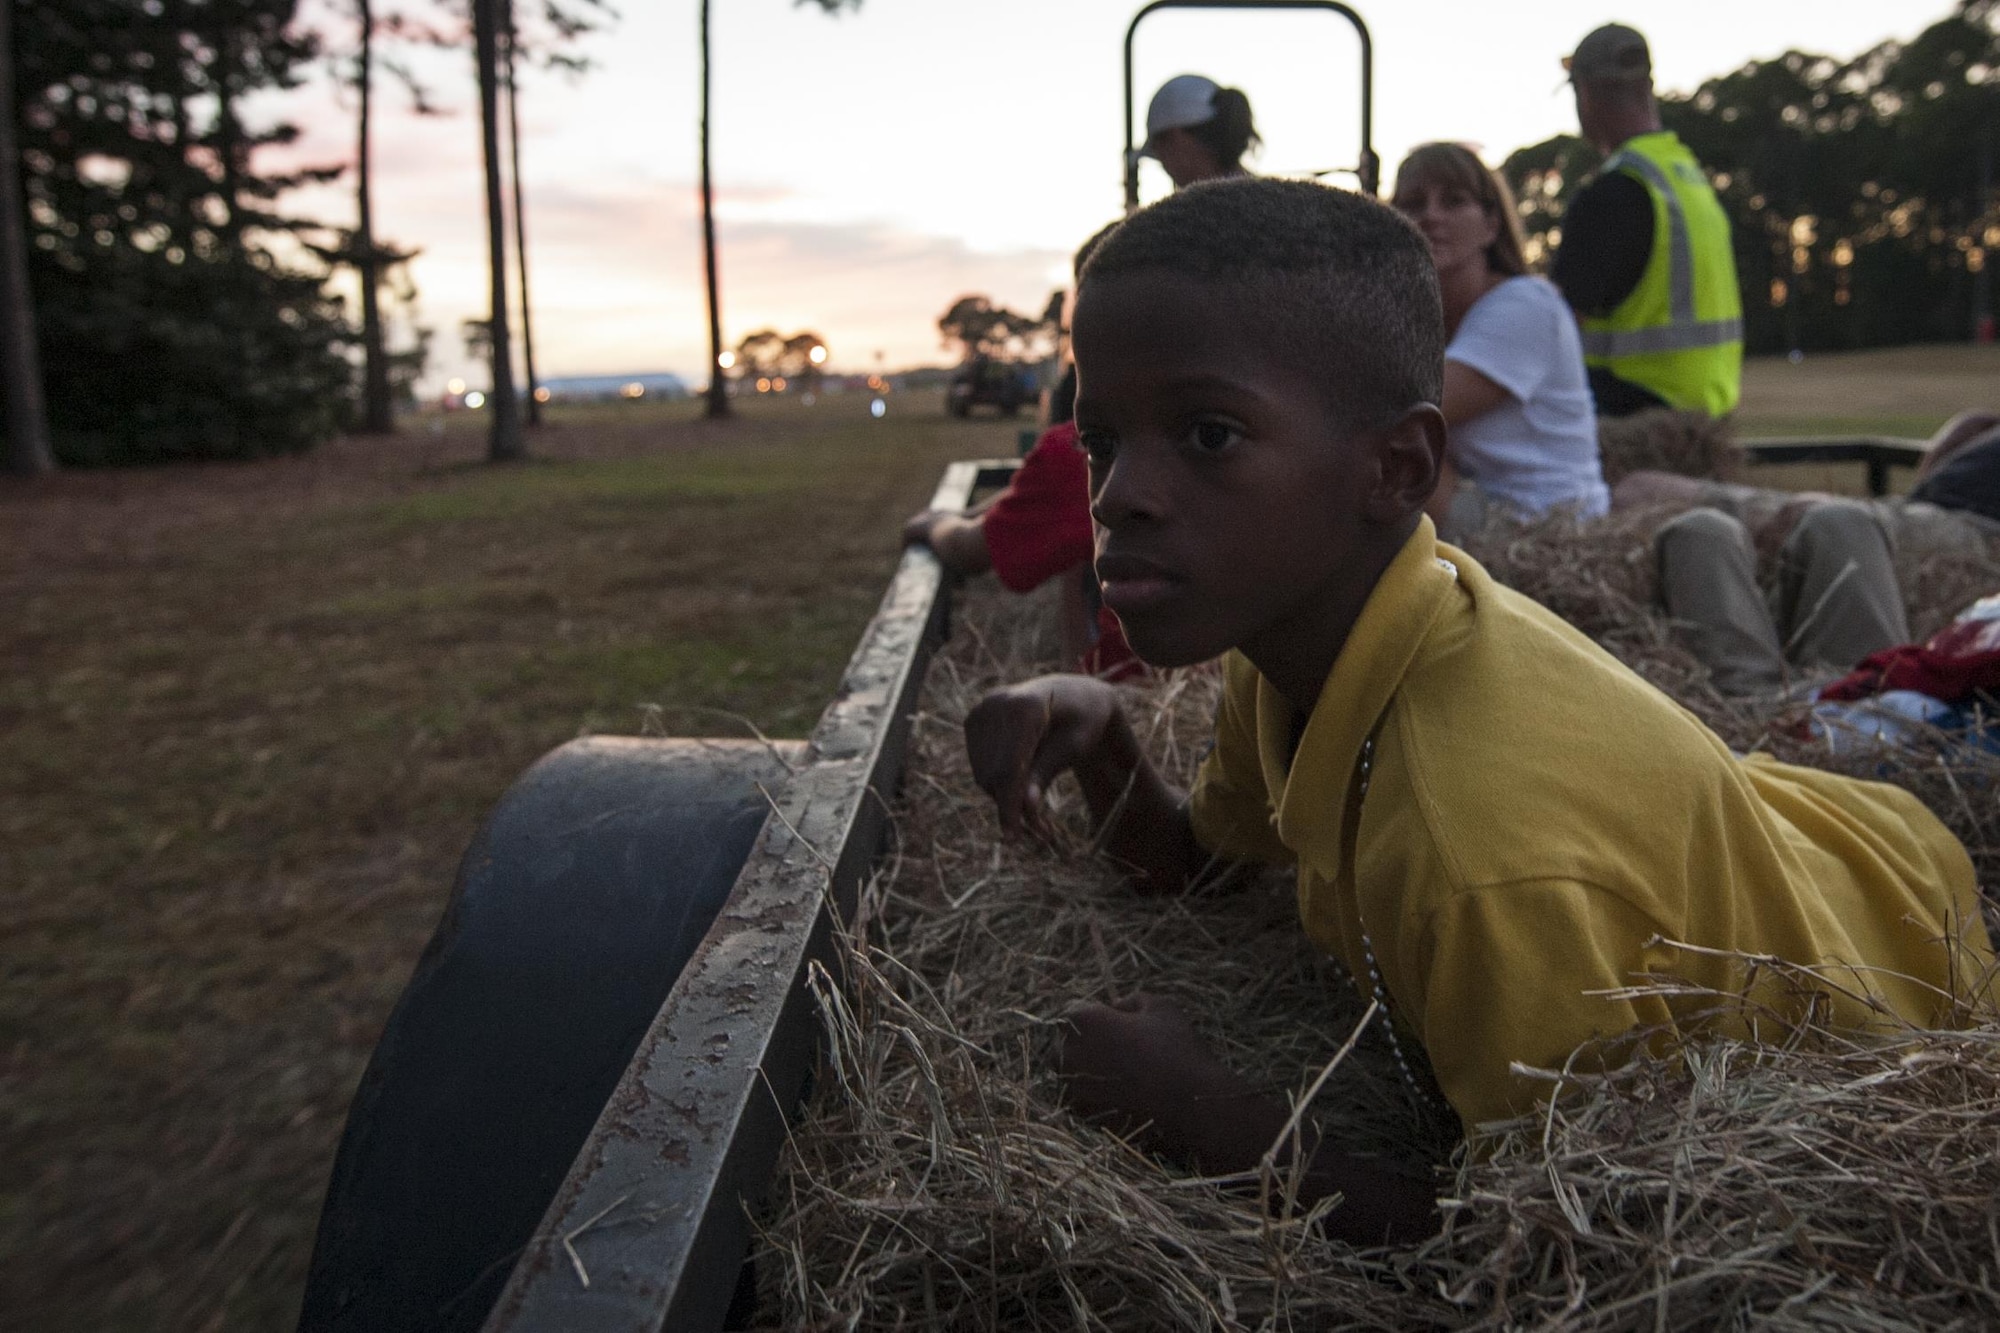 A child rides on a wagon during the haunted hay ride during the Haunted Lakes Fall Festival at Gator Lakes Golf Course on Hurlburt Field, Fla., Oct. 28, 2016. The hay ride took participants through a series of spooky displays. (U.S. Air Force photo by Airman 1st Class Joseph Pick)